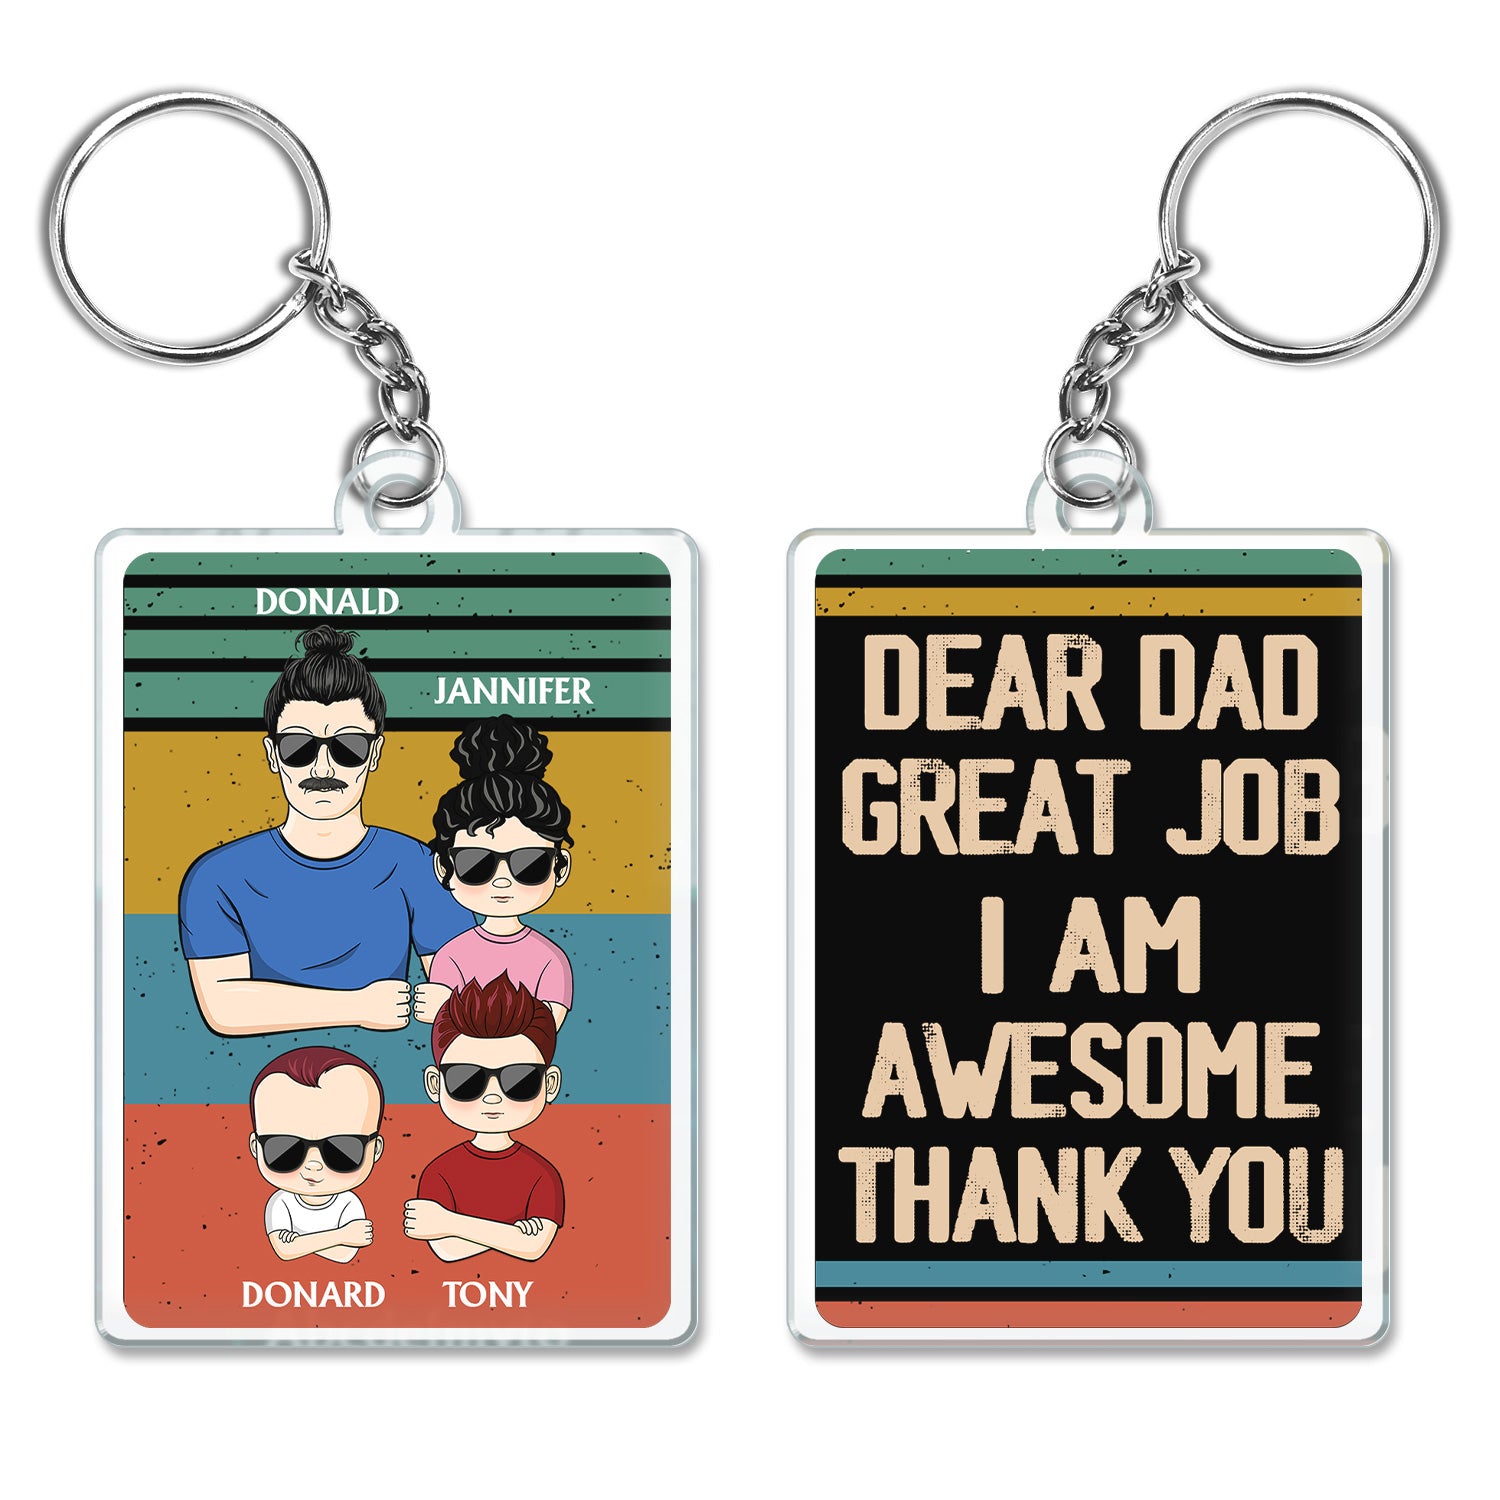 Dear Dad Great Job We're Awesome Thank You Young - Birthday, Loving Gift For Father, Grandpa, Grandfather - Personalized Custom Acrylic Keychain